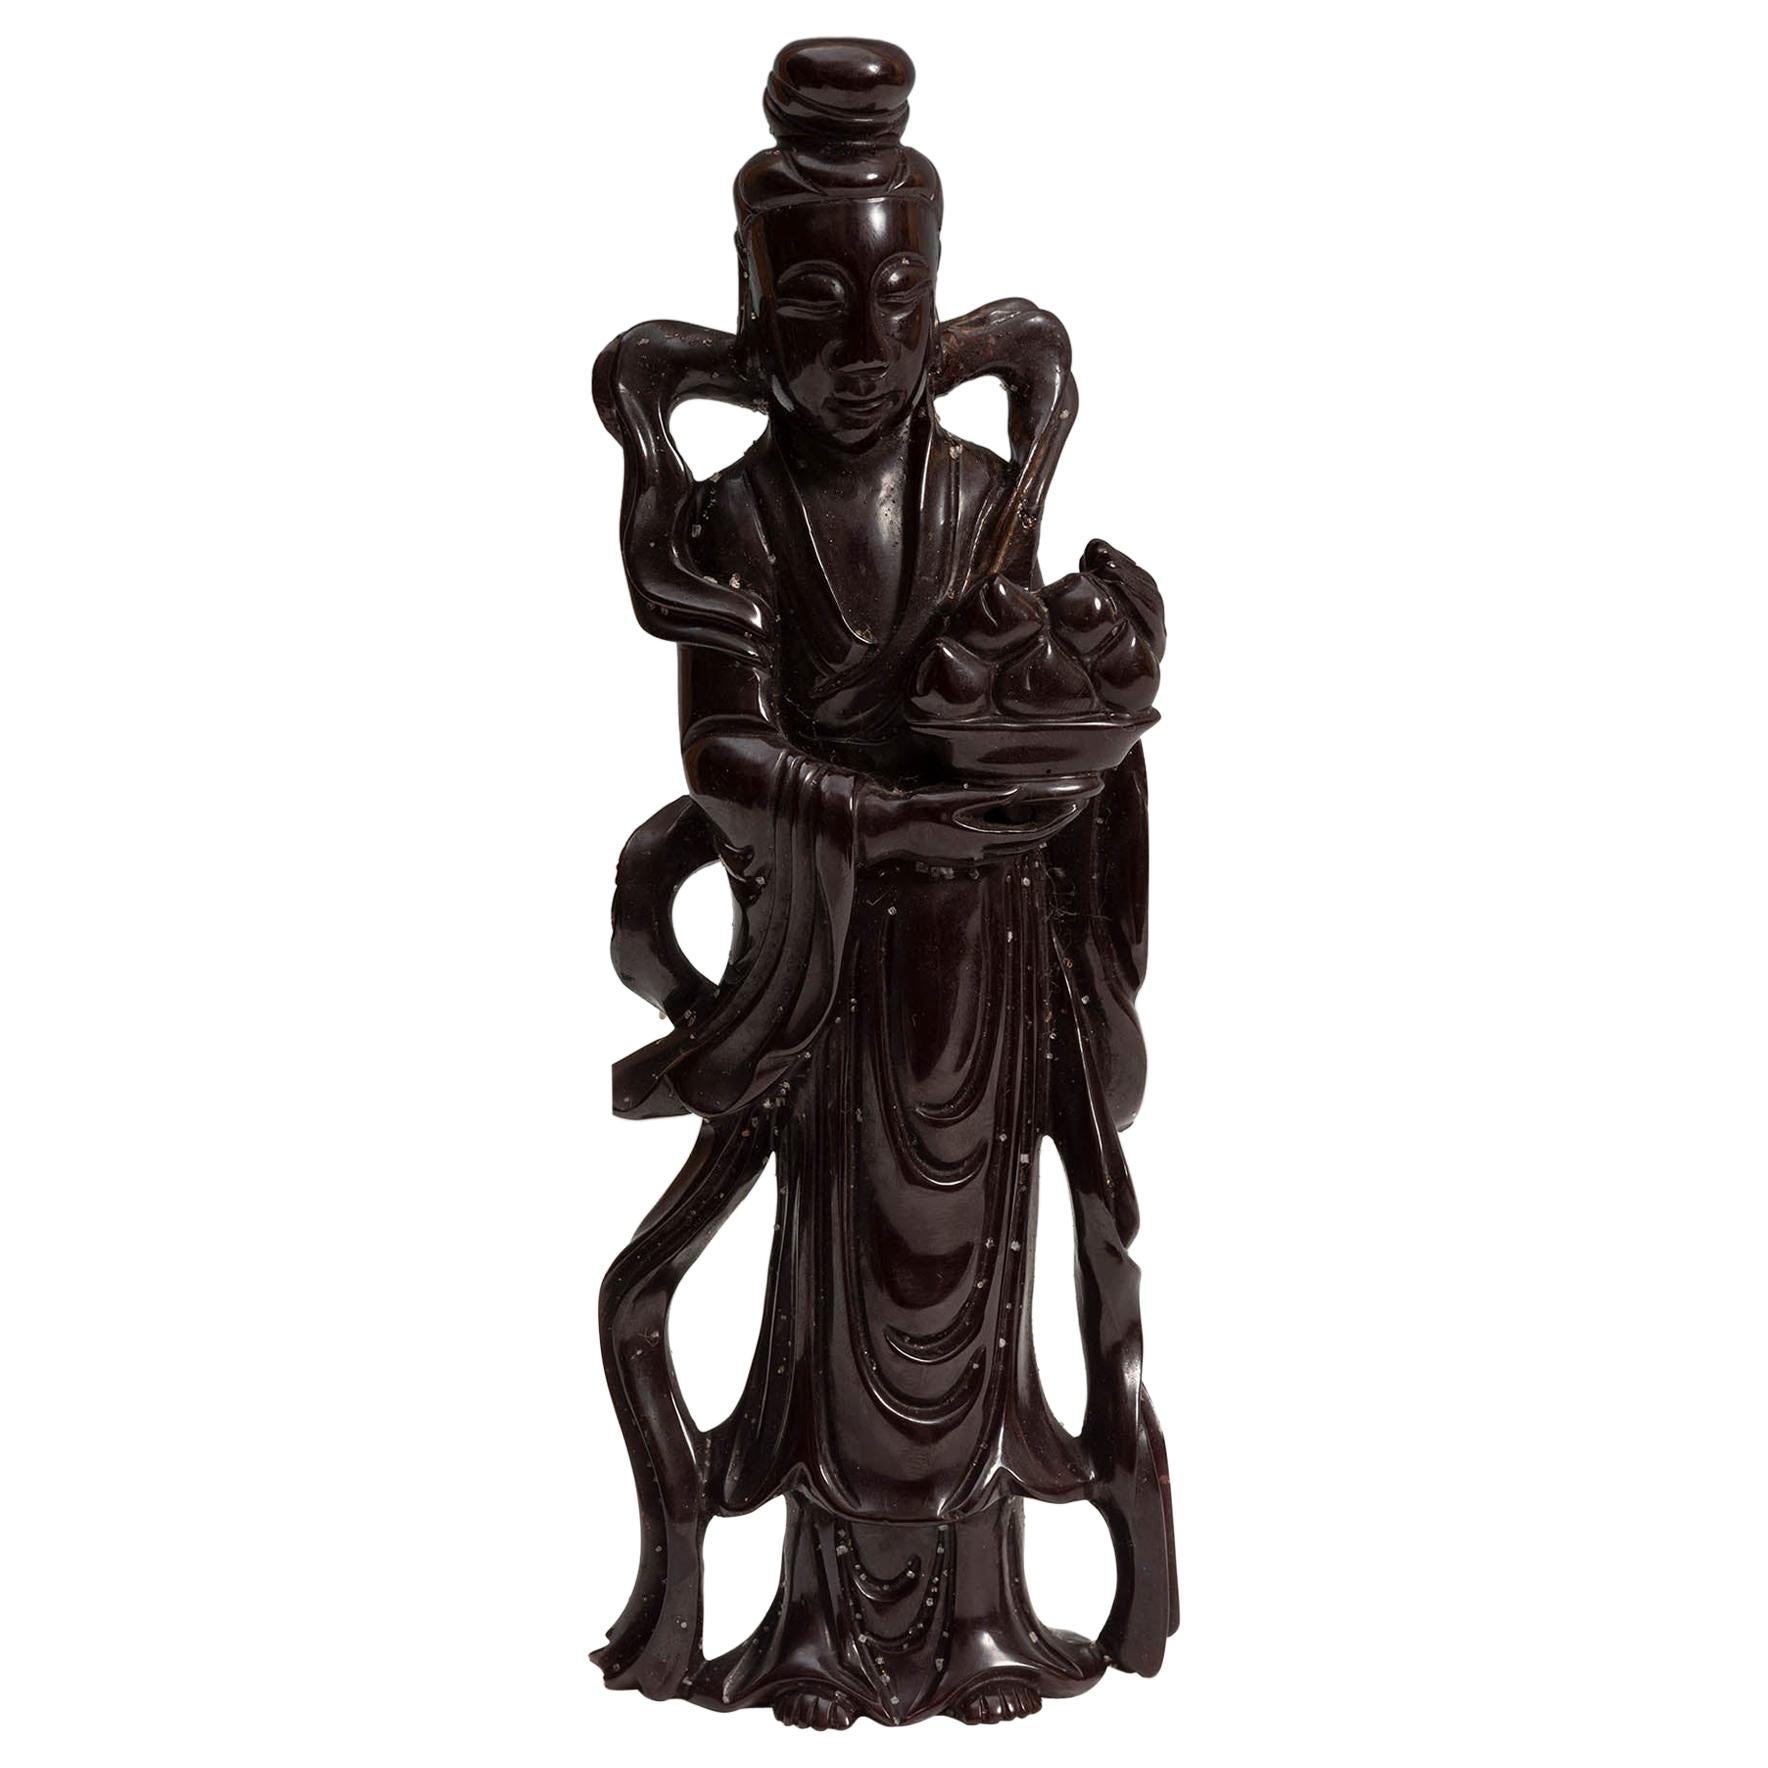 Mid-20th Century Chinese Hard-Stone Guanyin Figure Sculpture